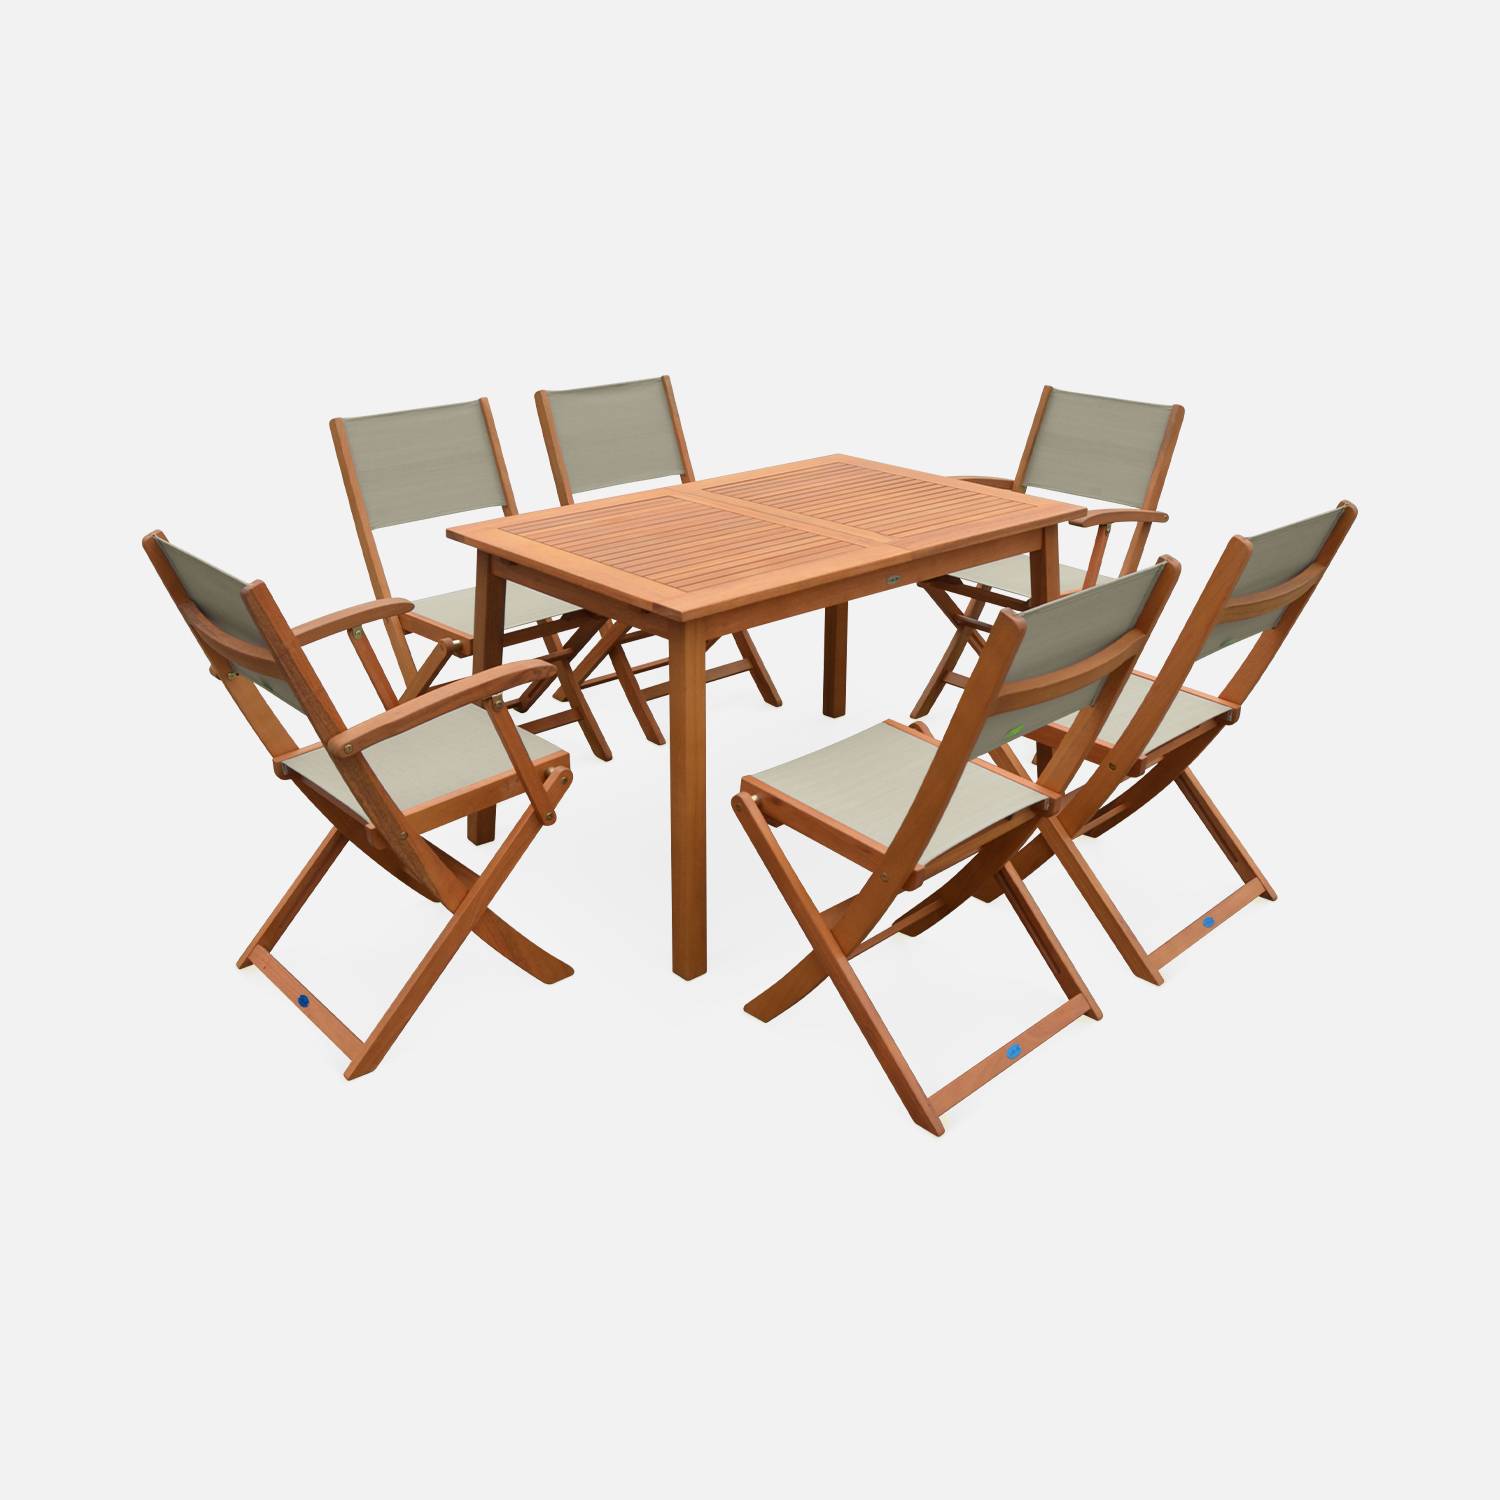 6-seater garden dining set, extendable 120-180cm FSC-eucalyptus wooden table, 4 chairs and 2 armchairs - Almeria 6 - Beige-Brown textilene seats Photo4